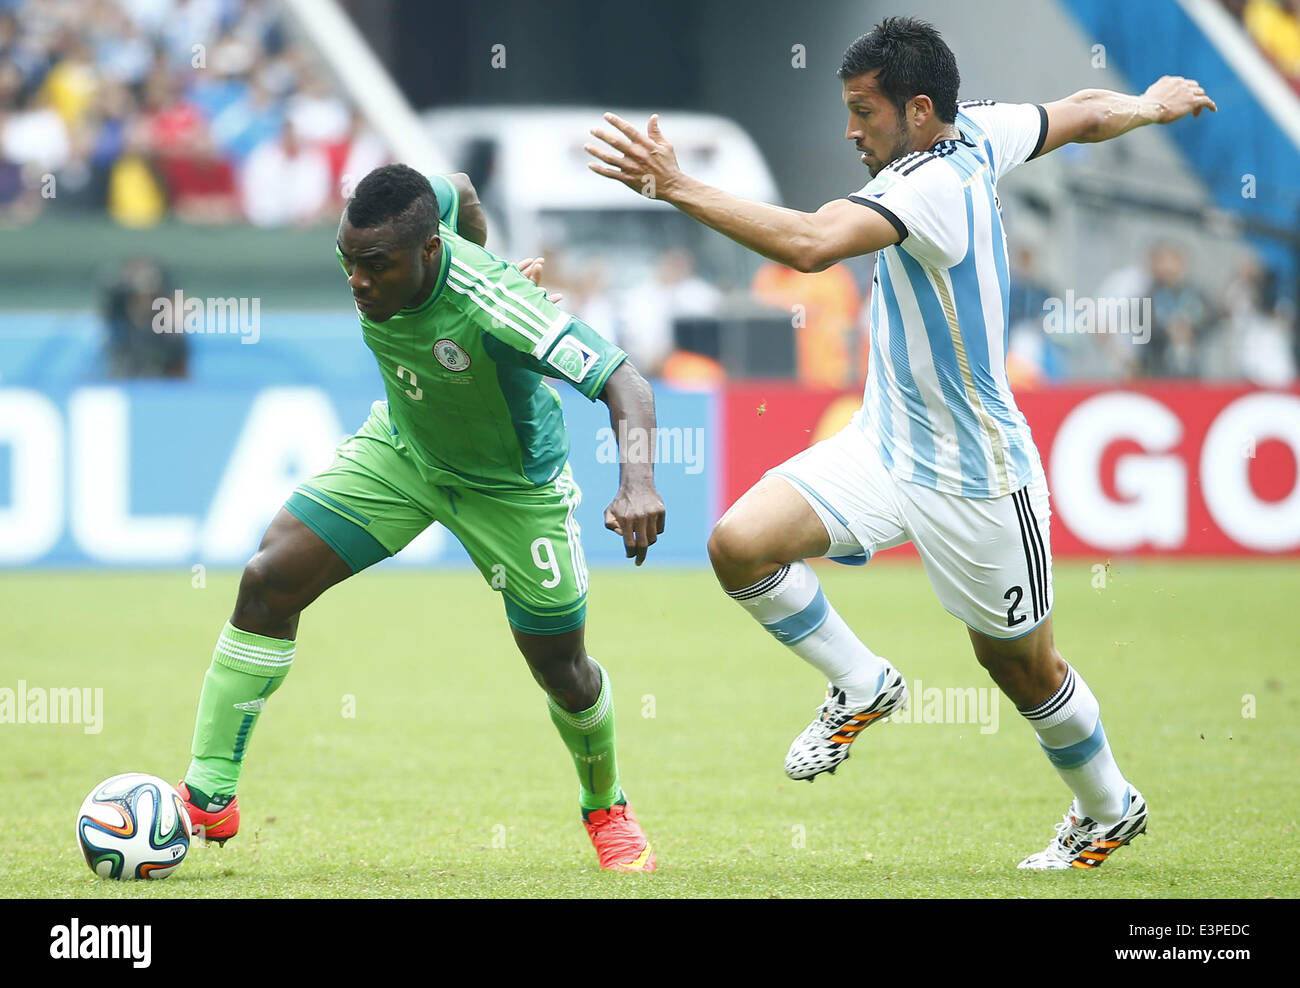 Porto Alegre, Brazil. 25th June, 2014. Nigeria's Emmanuel Emenike (L) vies with Argentina's Ezequiel Garay during a Group F match between Nigeria and Argentina of 2014 FIFA World Cup at the Estadio Beira-Rio Stadium in Porto Alegre, Brazil, on June 25, 2014. © Chen Jianli/Xinhua/Alamy Live News Stock Photo